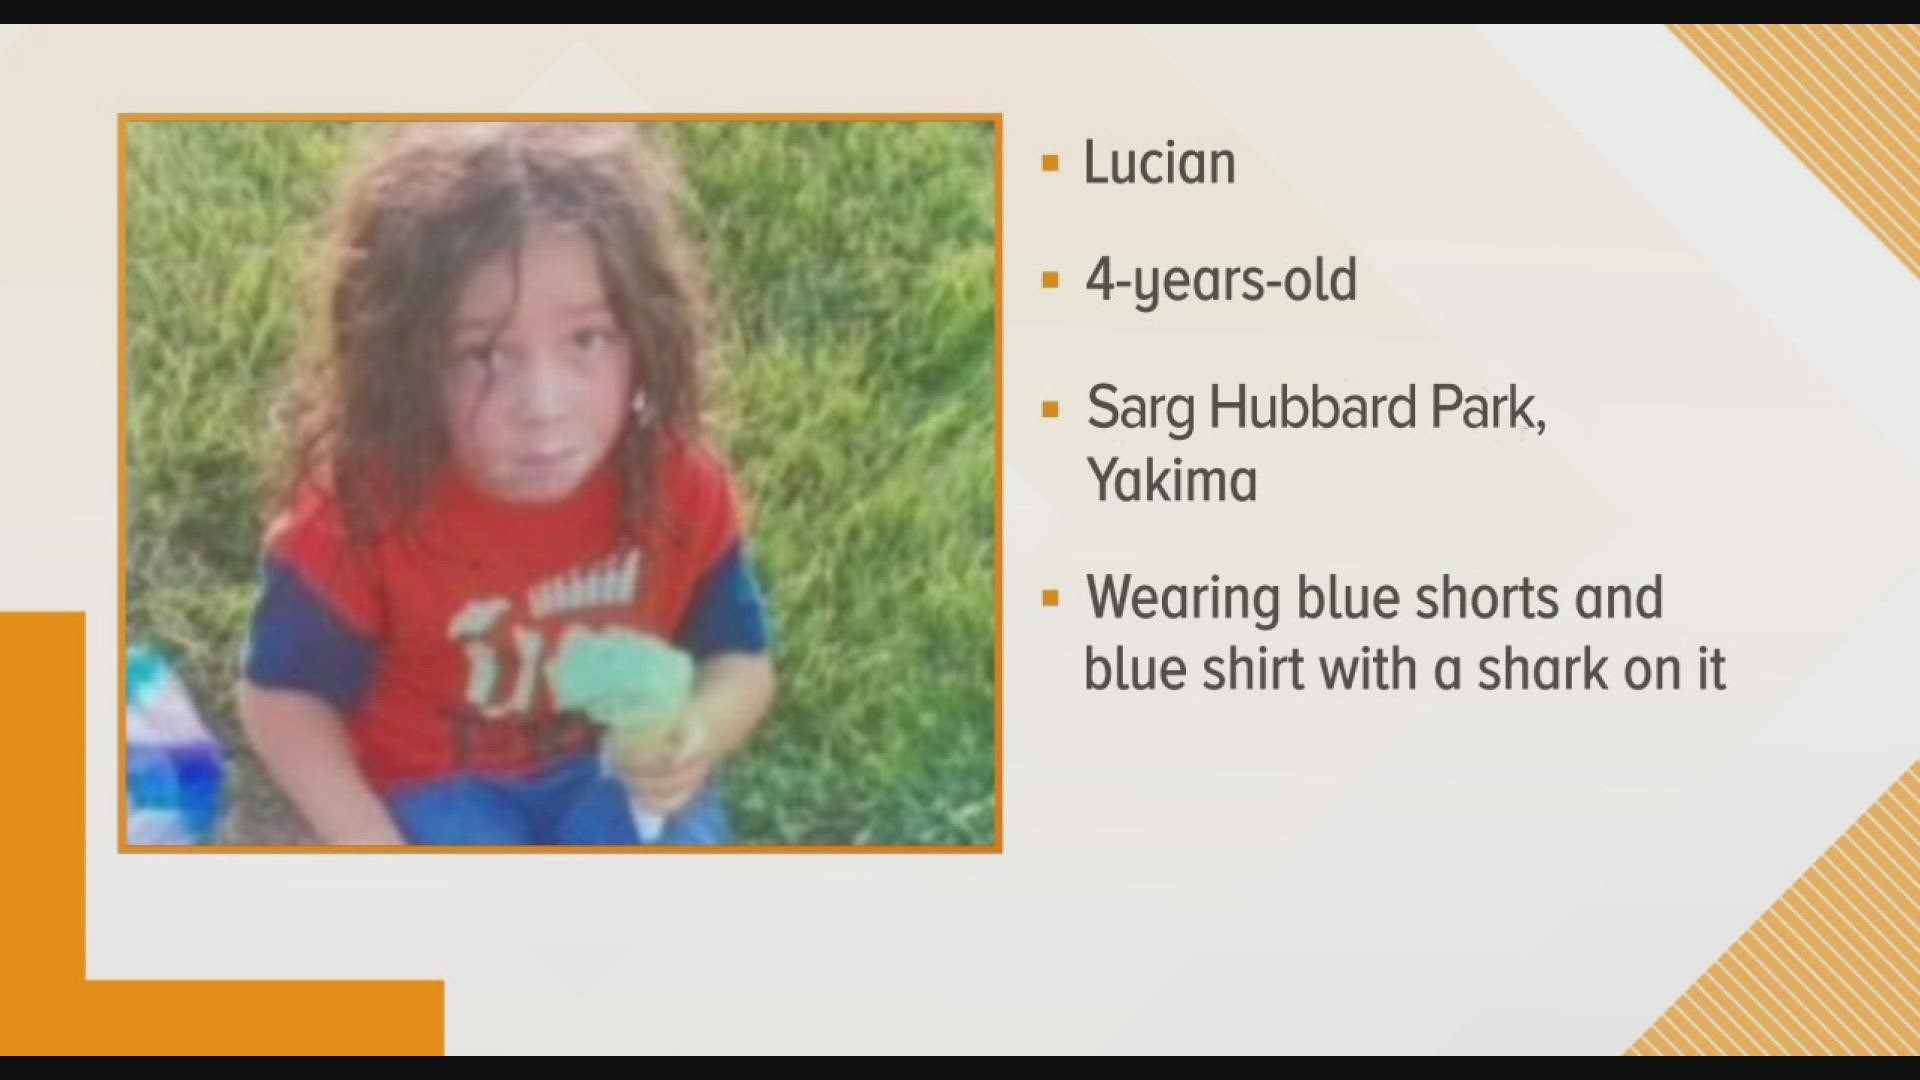 Police say "Lucian" walked away from his parents at Sarg Hubbard Park in Yakima Saturday night